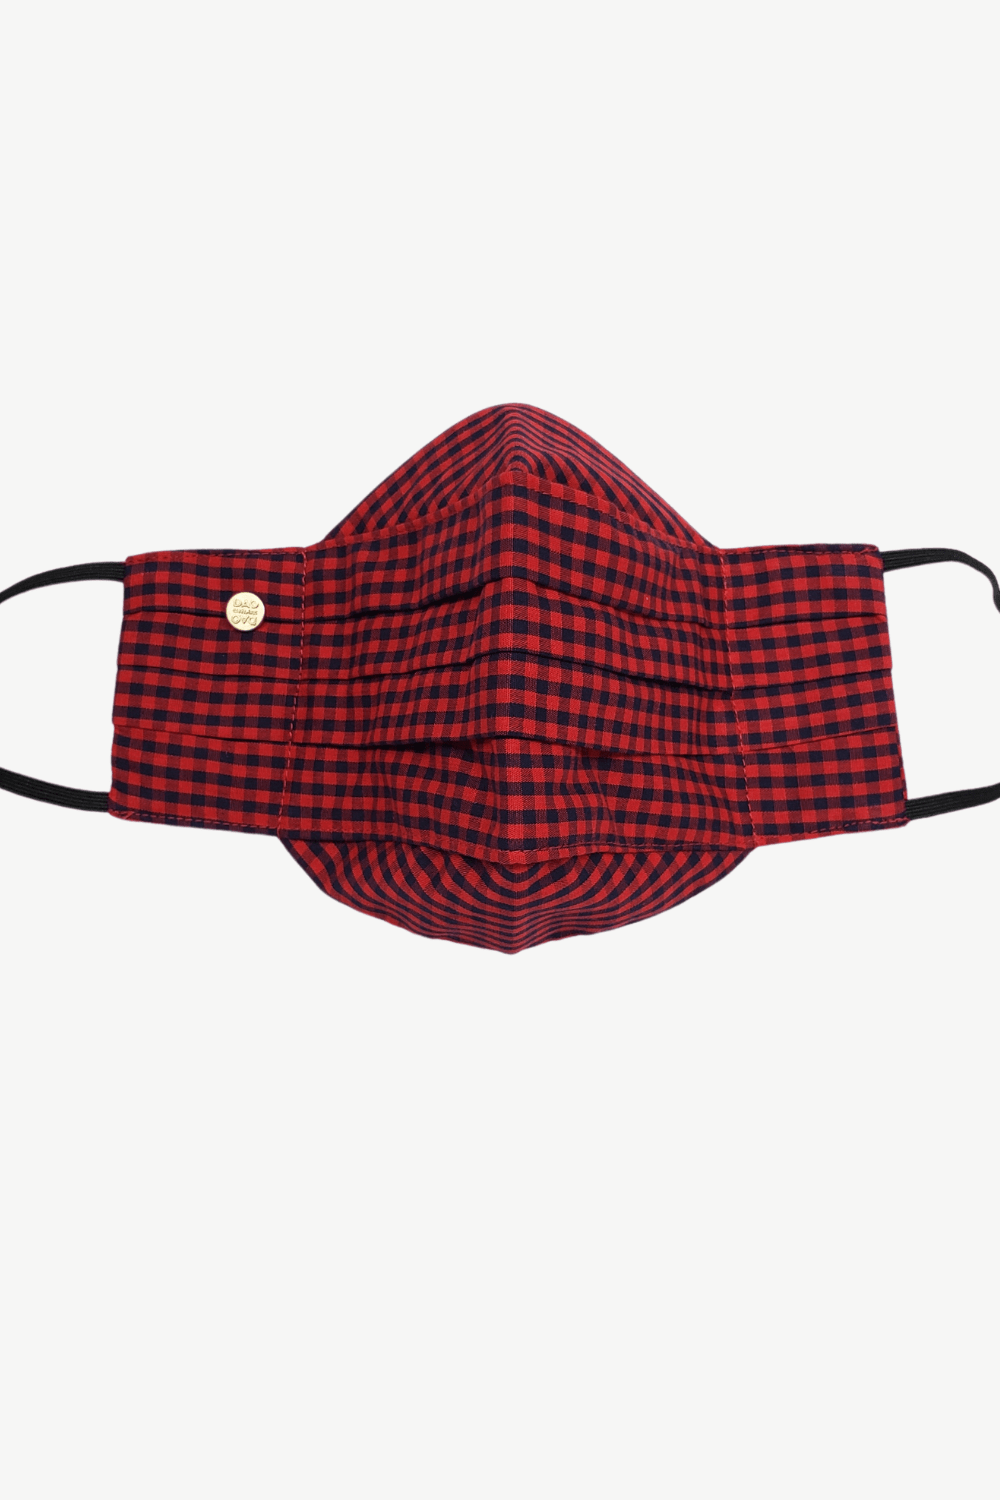 Safely Sip Face Masks Safely Sip Mask in Red and Black Gingham - Chloe Dao